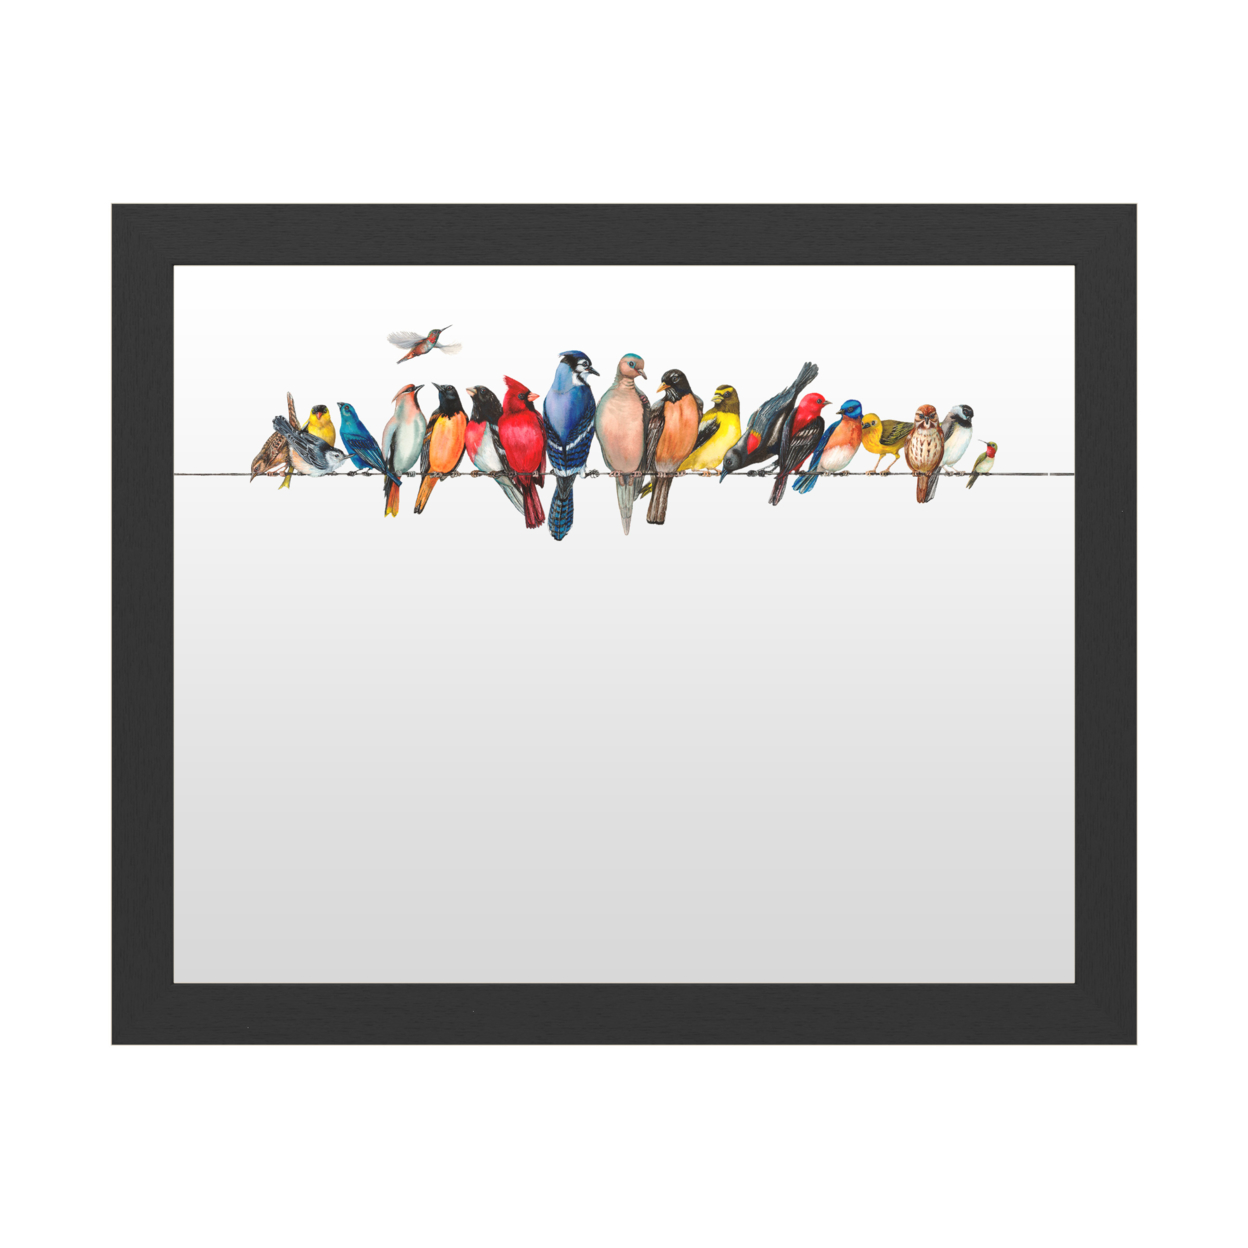 Dry Erase 16 X 20 Marker Board With Printed Artwork - Wendy Russell Large Bird Menagerie Ii White Board - Ready To Hang